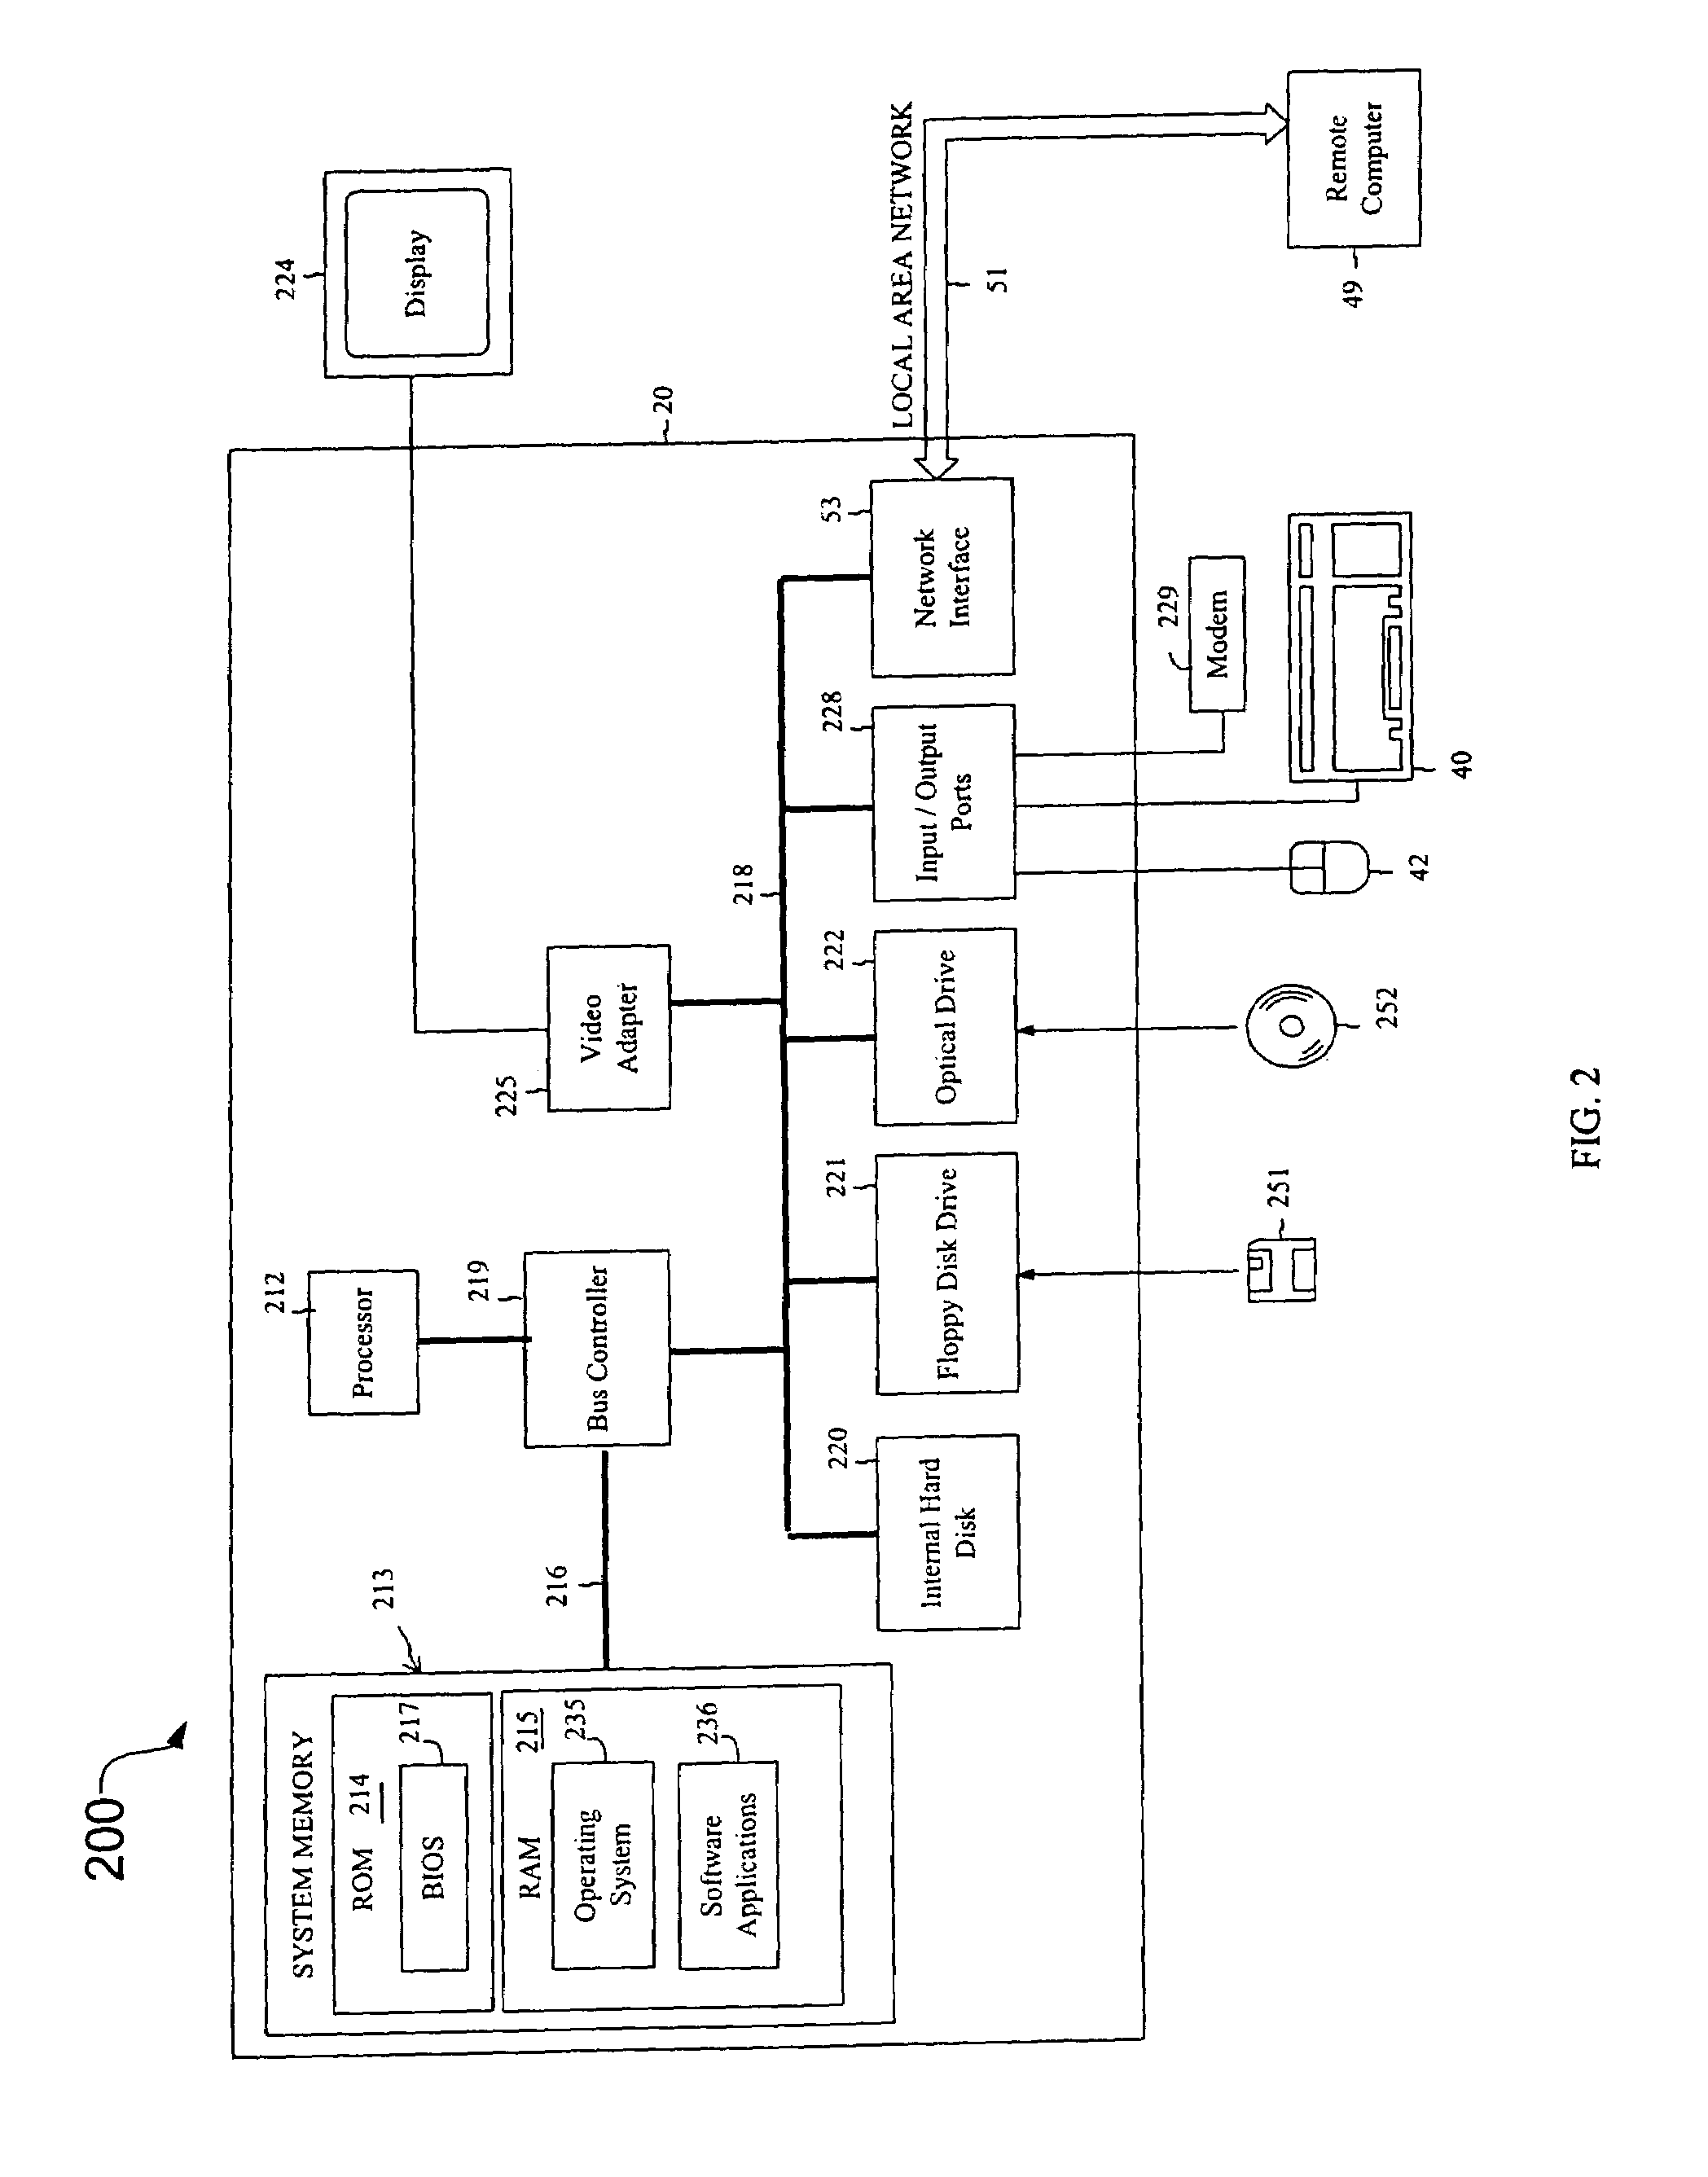 Systems and methods for providing optimal light-CO2 combinations for plant production